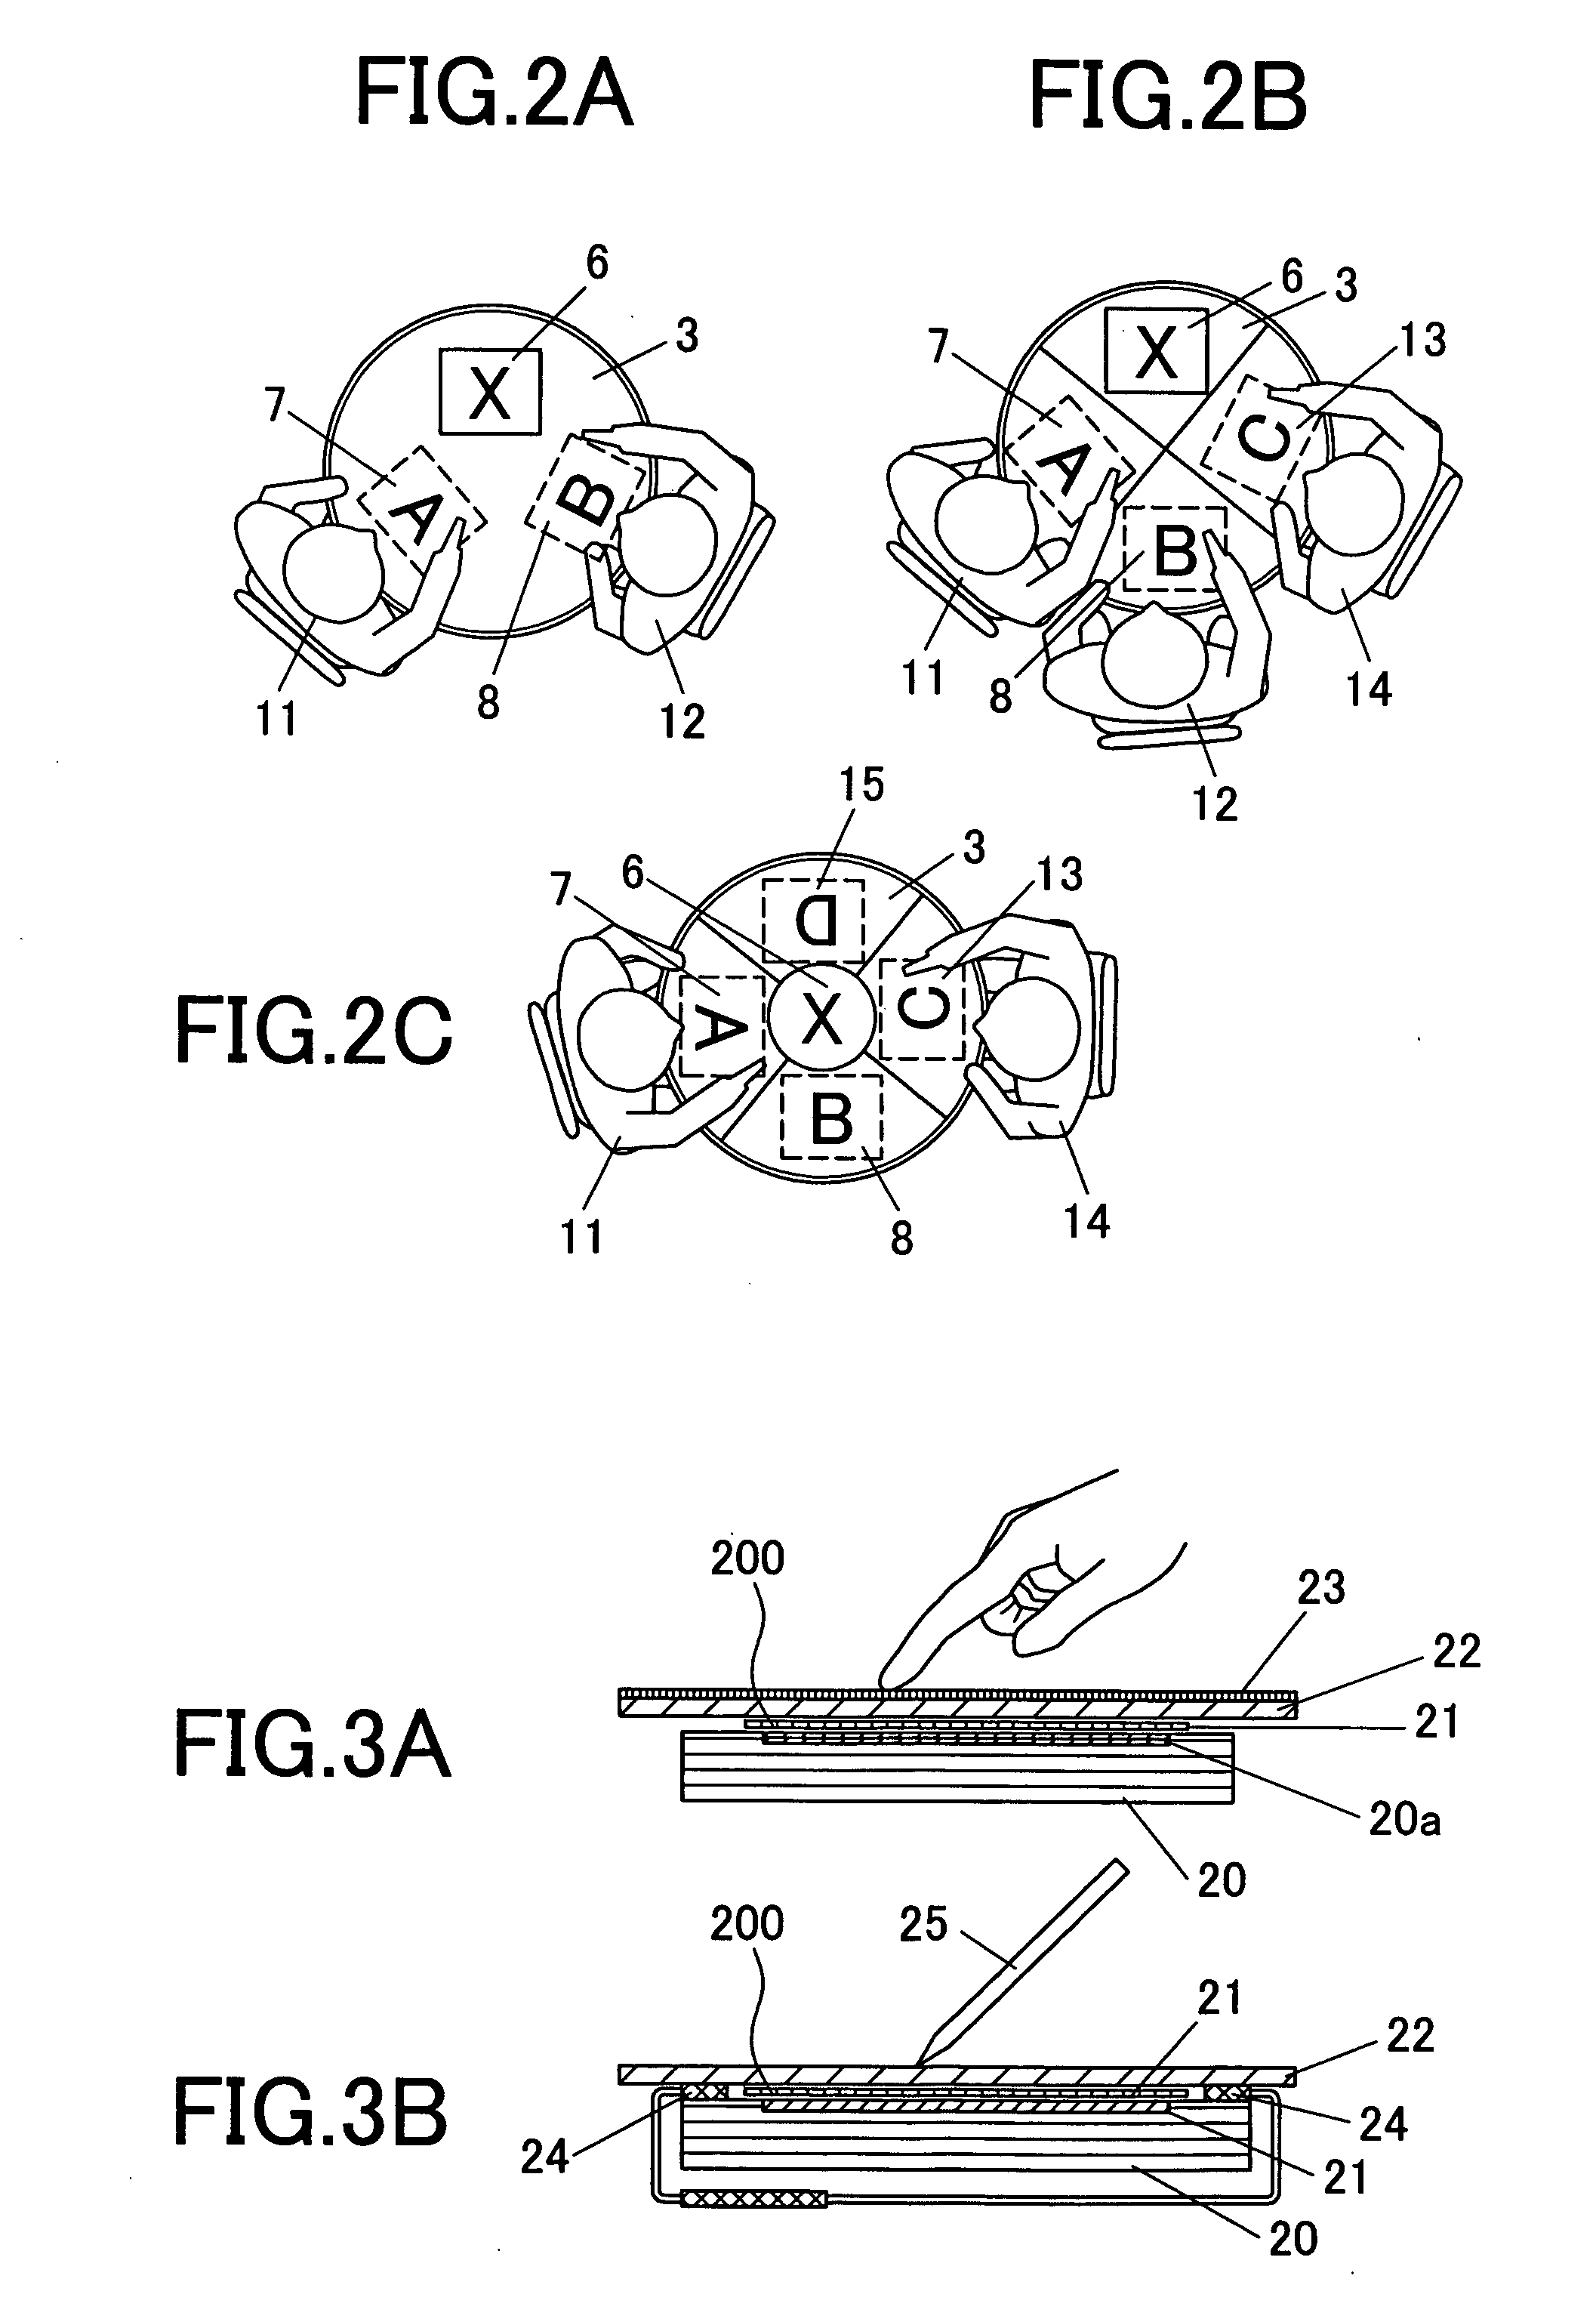 Displaying and operating methods for a table-shaped information terminal